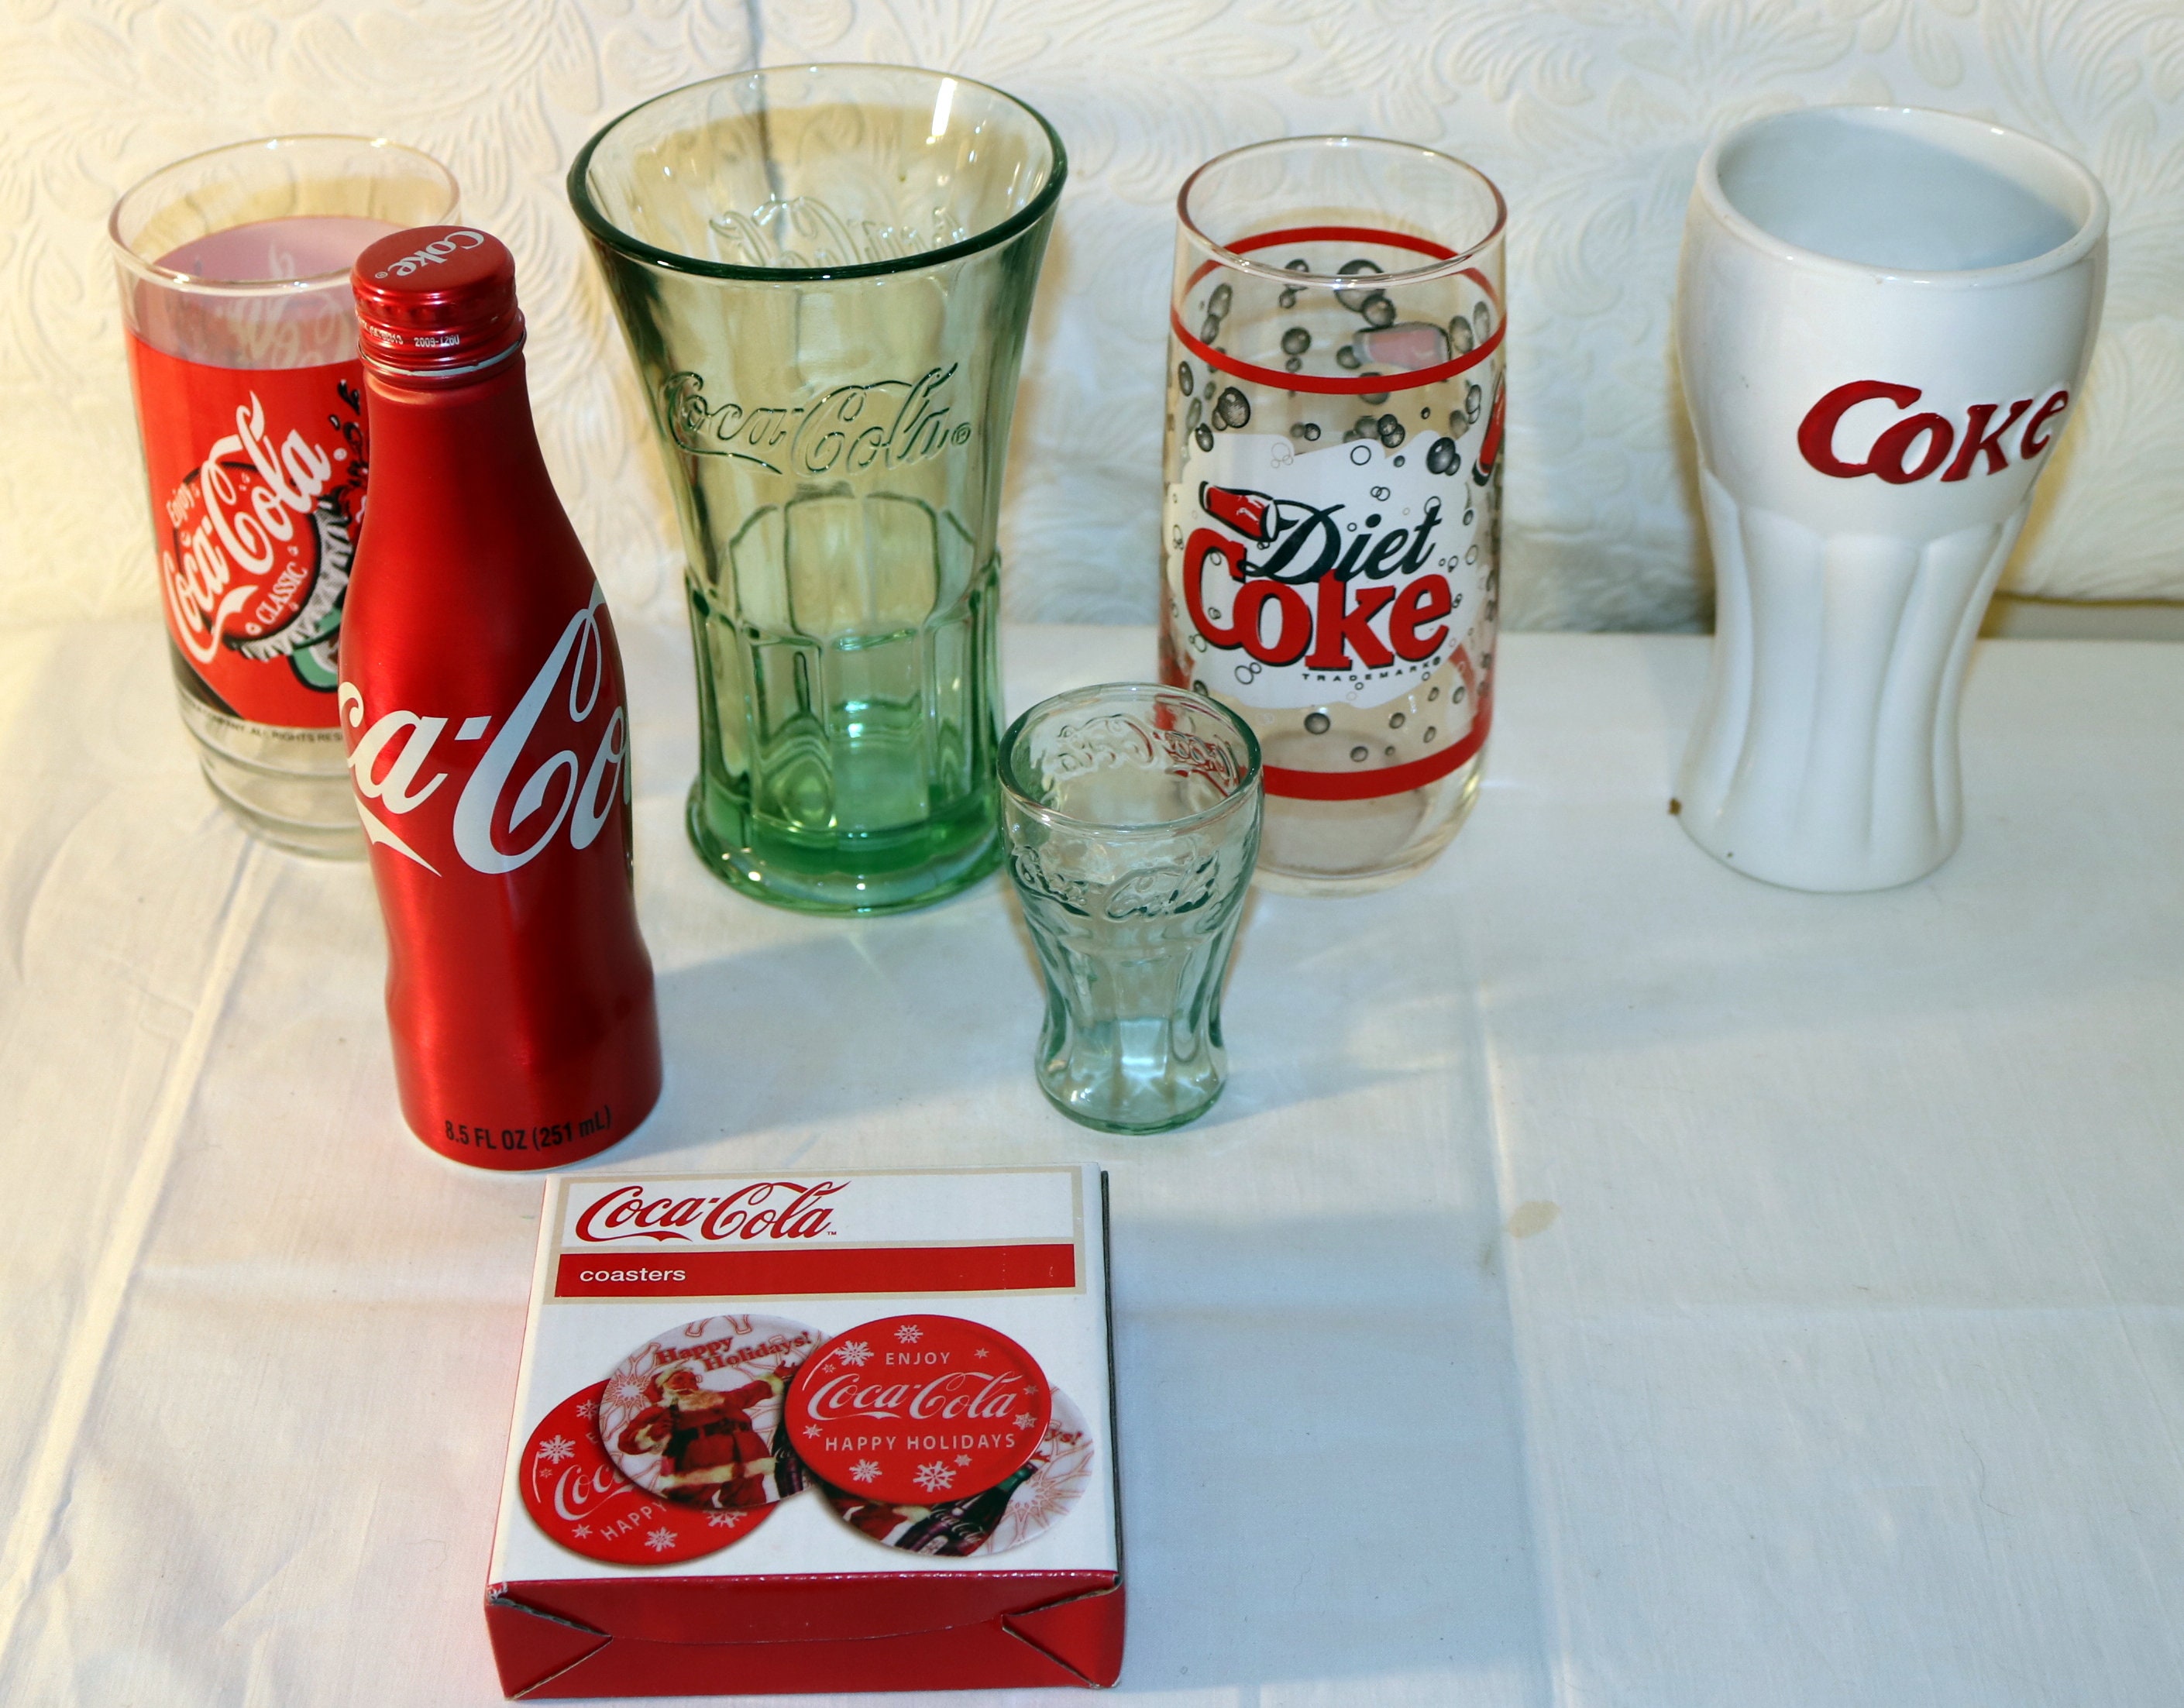 Libbey Green 6.25 oz. Coca Cola Juice Glasses Bundle (4.5 Inches Tall) - Set of 12